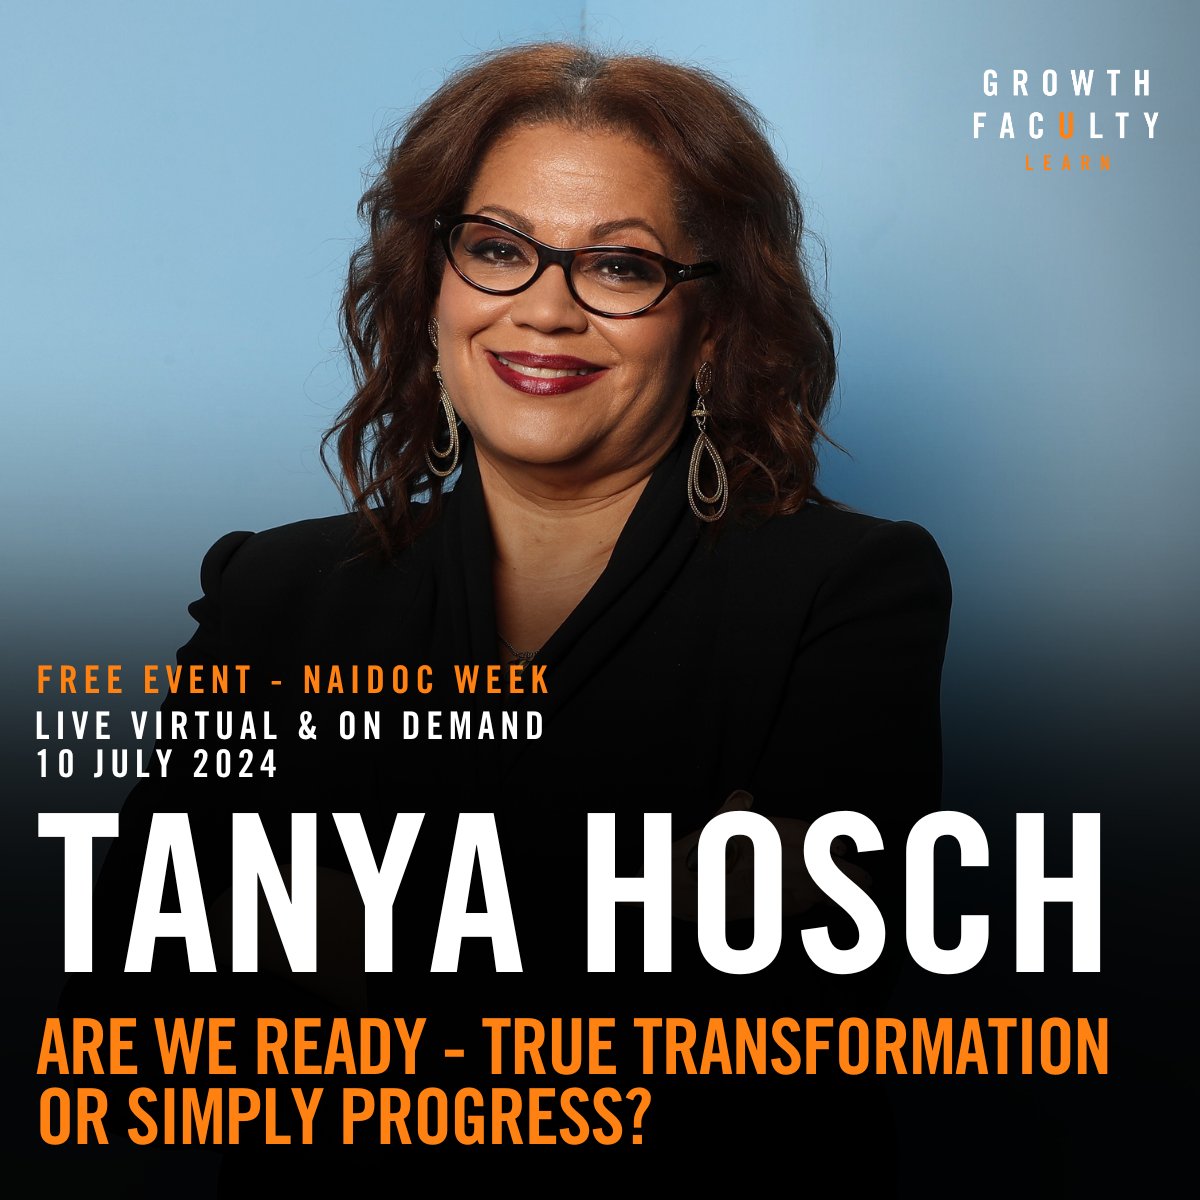 Honour #NAIDOC week with us during a fascinating conversation with Tanya Hosch, one of Australia’s pre-eminent Indigenous leaders, who has held leadership roles in sport, the arts, culture, social justice, and public policy. A FREE for all Australians >>> thegrowthfaculty.co/Tanya_Hosch